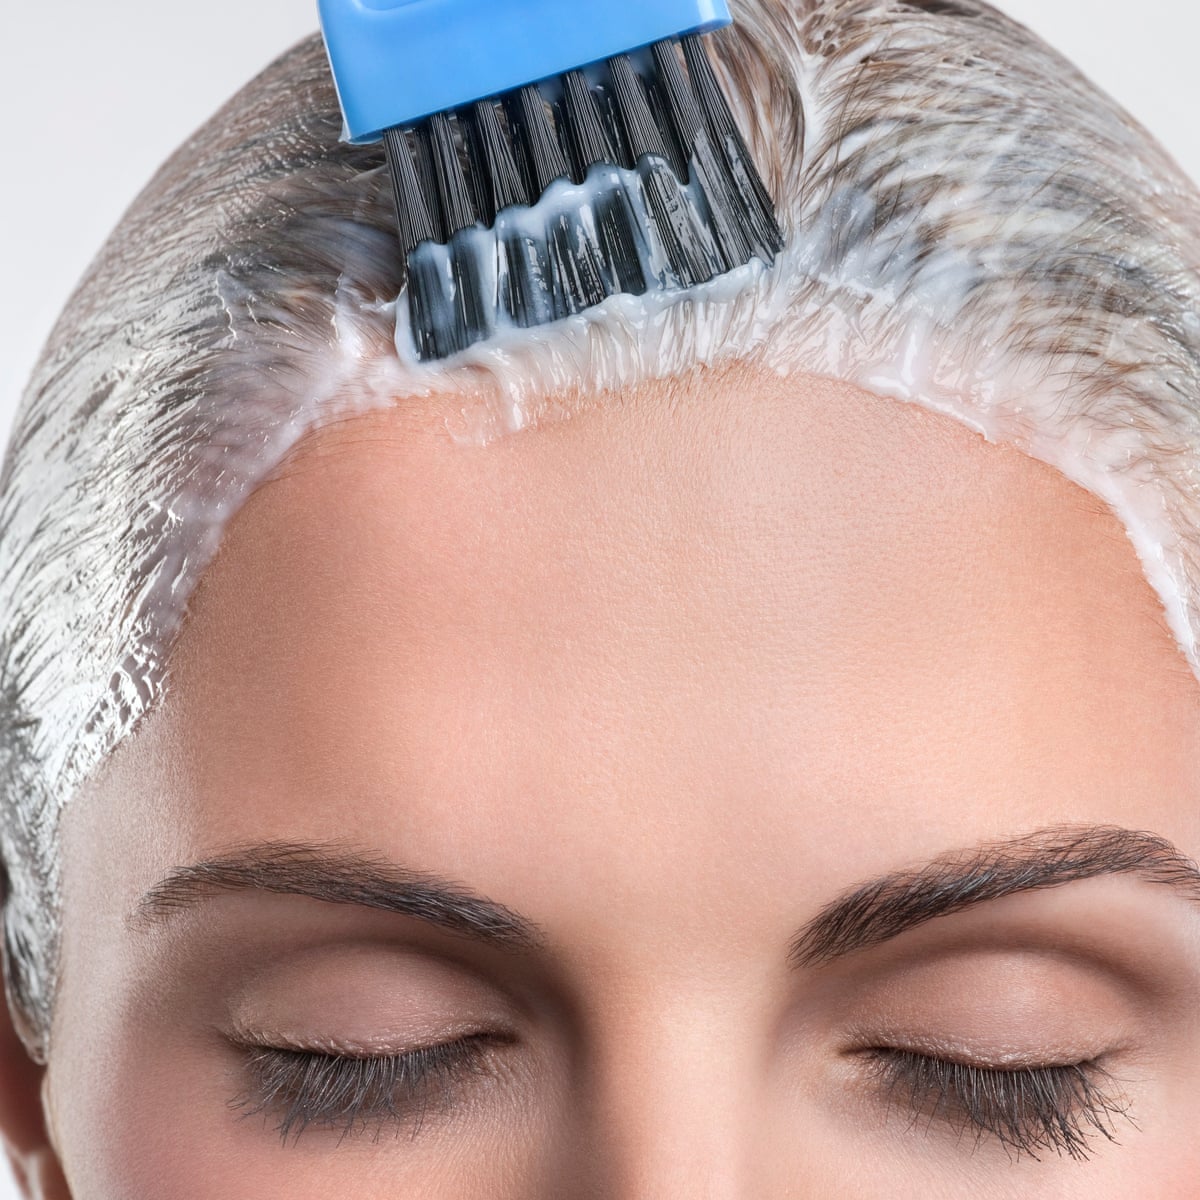 How to colour your hair – without damaging it | Beauty | The Guardian